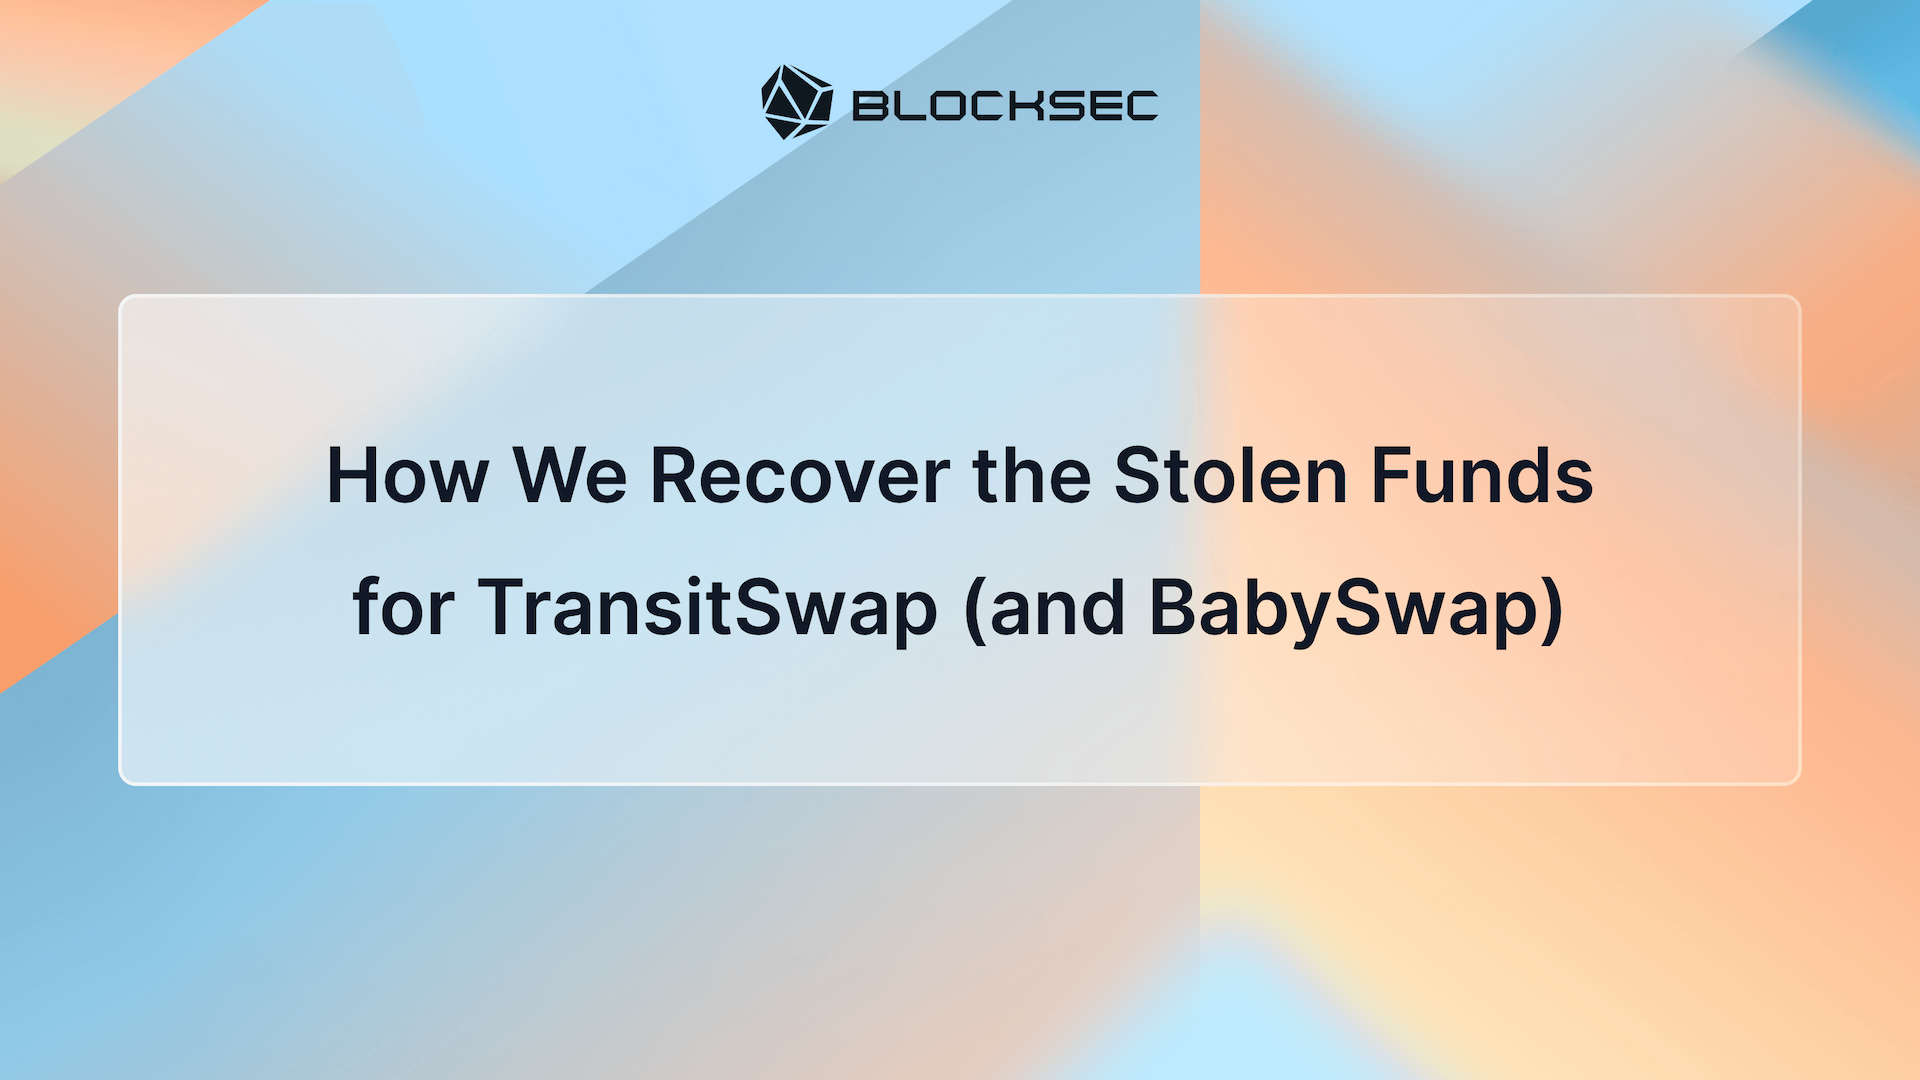 How We Recover the Stolen Funds for TransitSwap (and BabySwap)